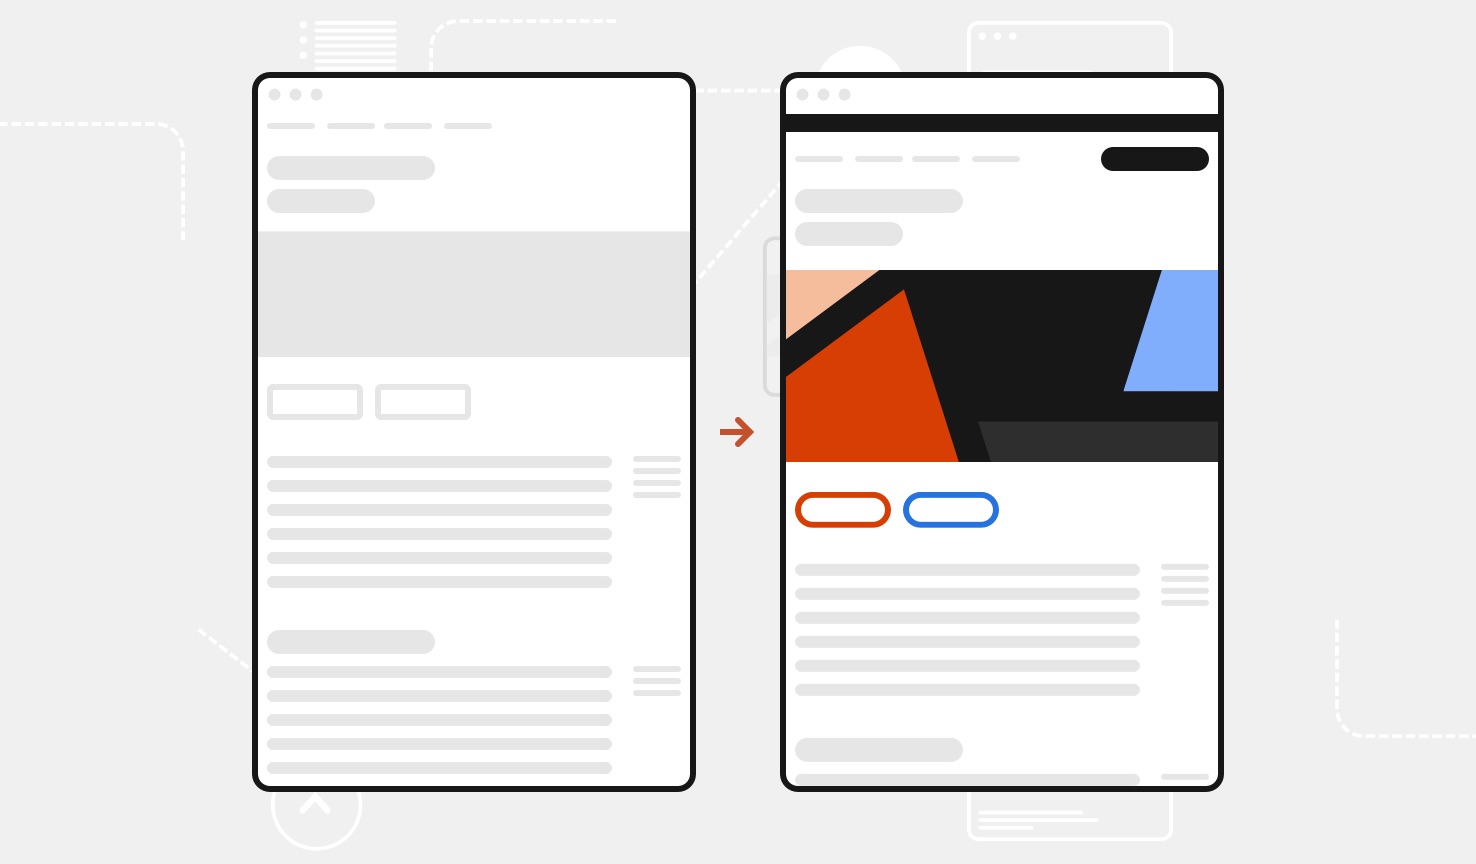 Side by side illustrations show before-and-after examples of a web page. One has the original page and the other shows that page with just a few design system components added.